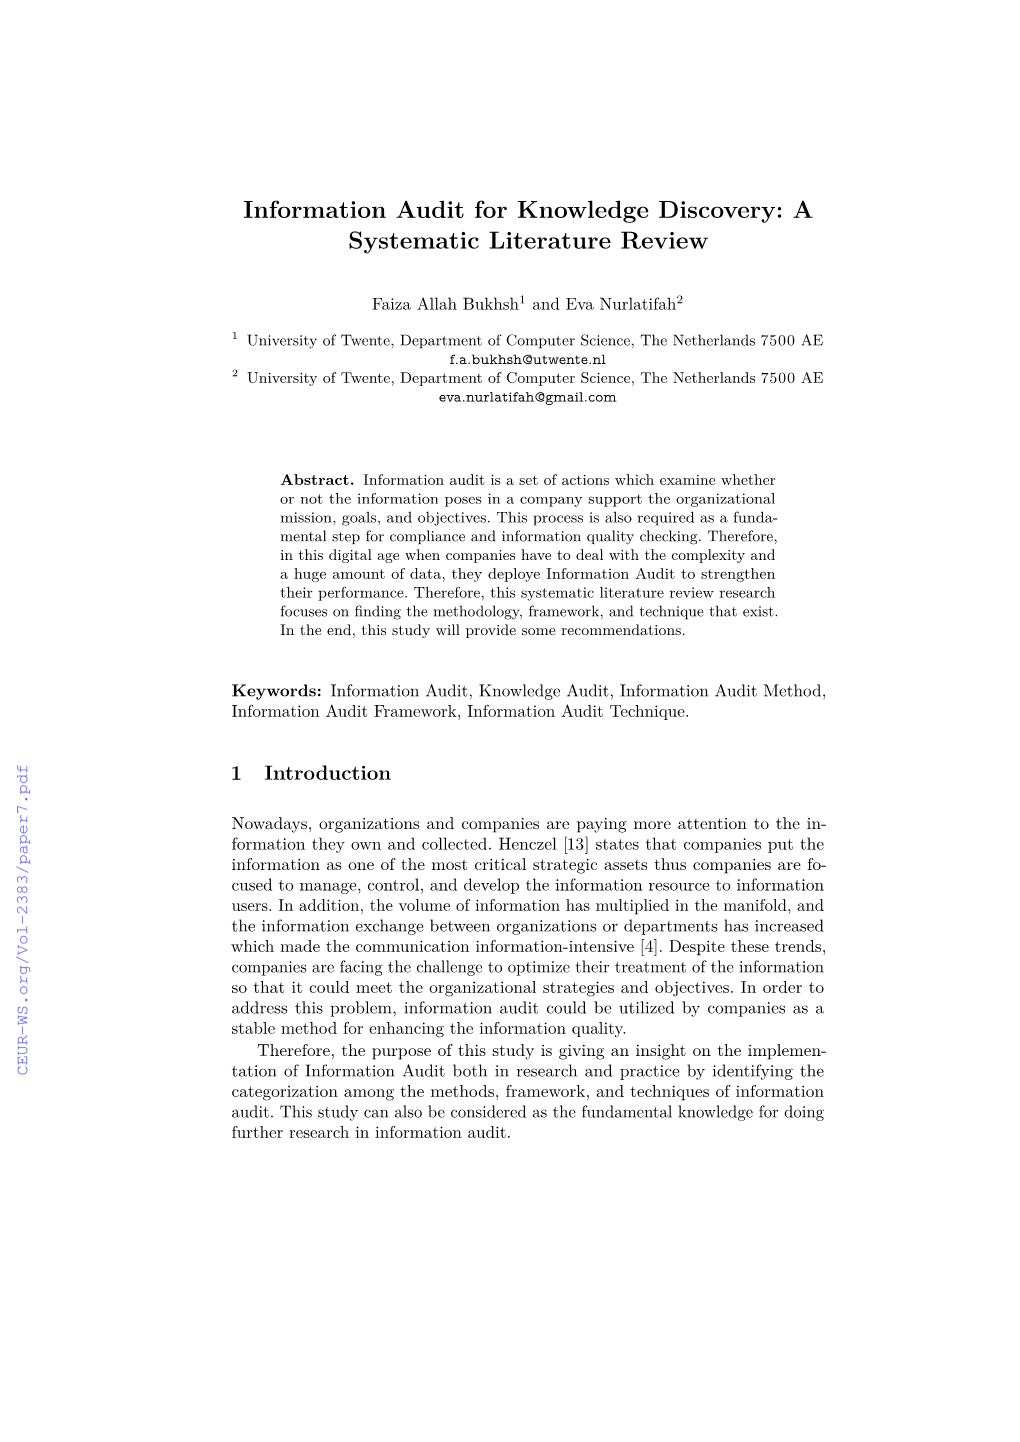 Information Audit for Knowledge Discovery: a Systematic Literature Review